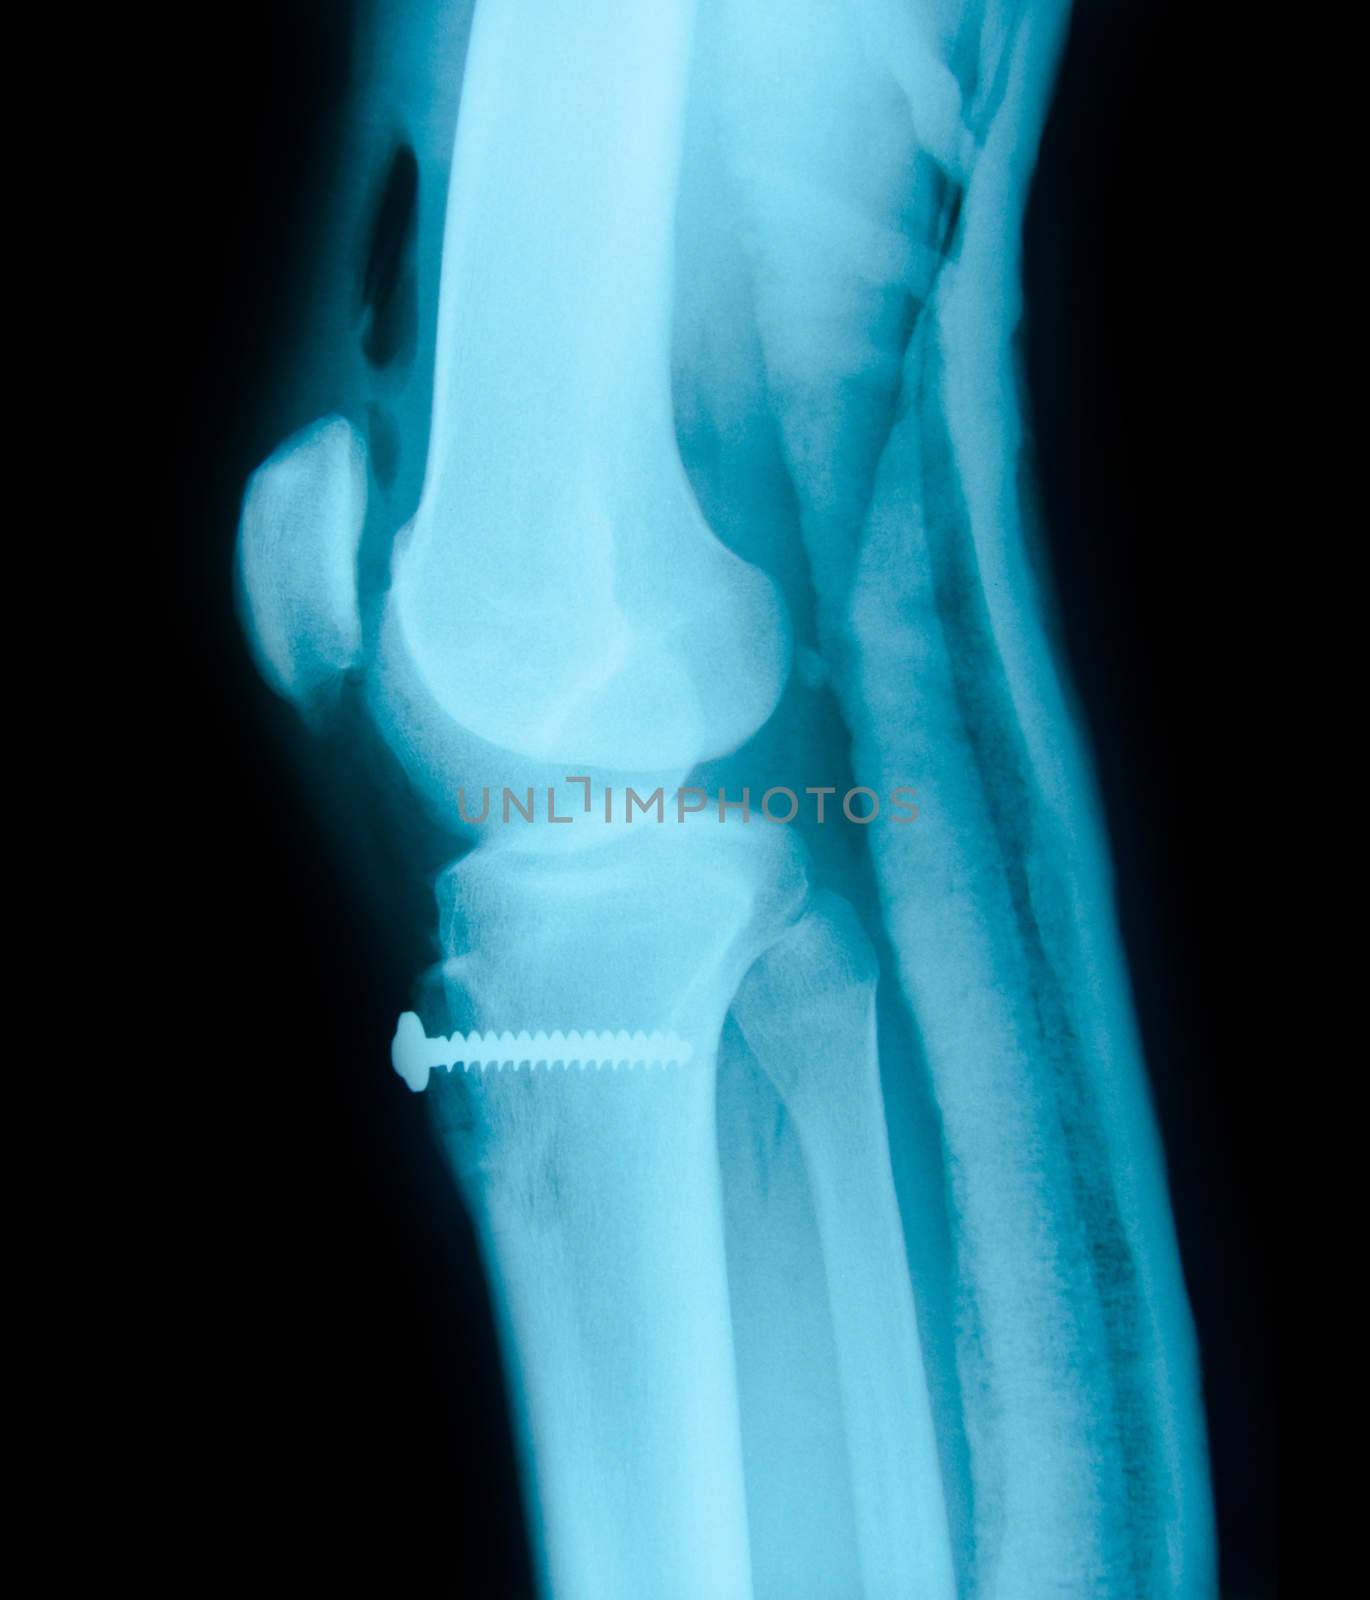 Right knee joint and Medical equipment X-ray by Gamjai